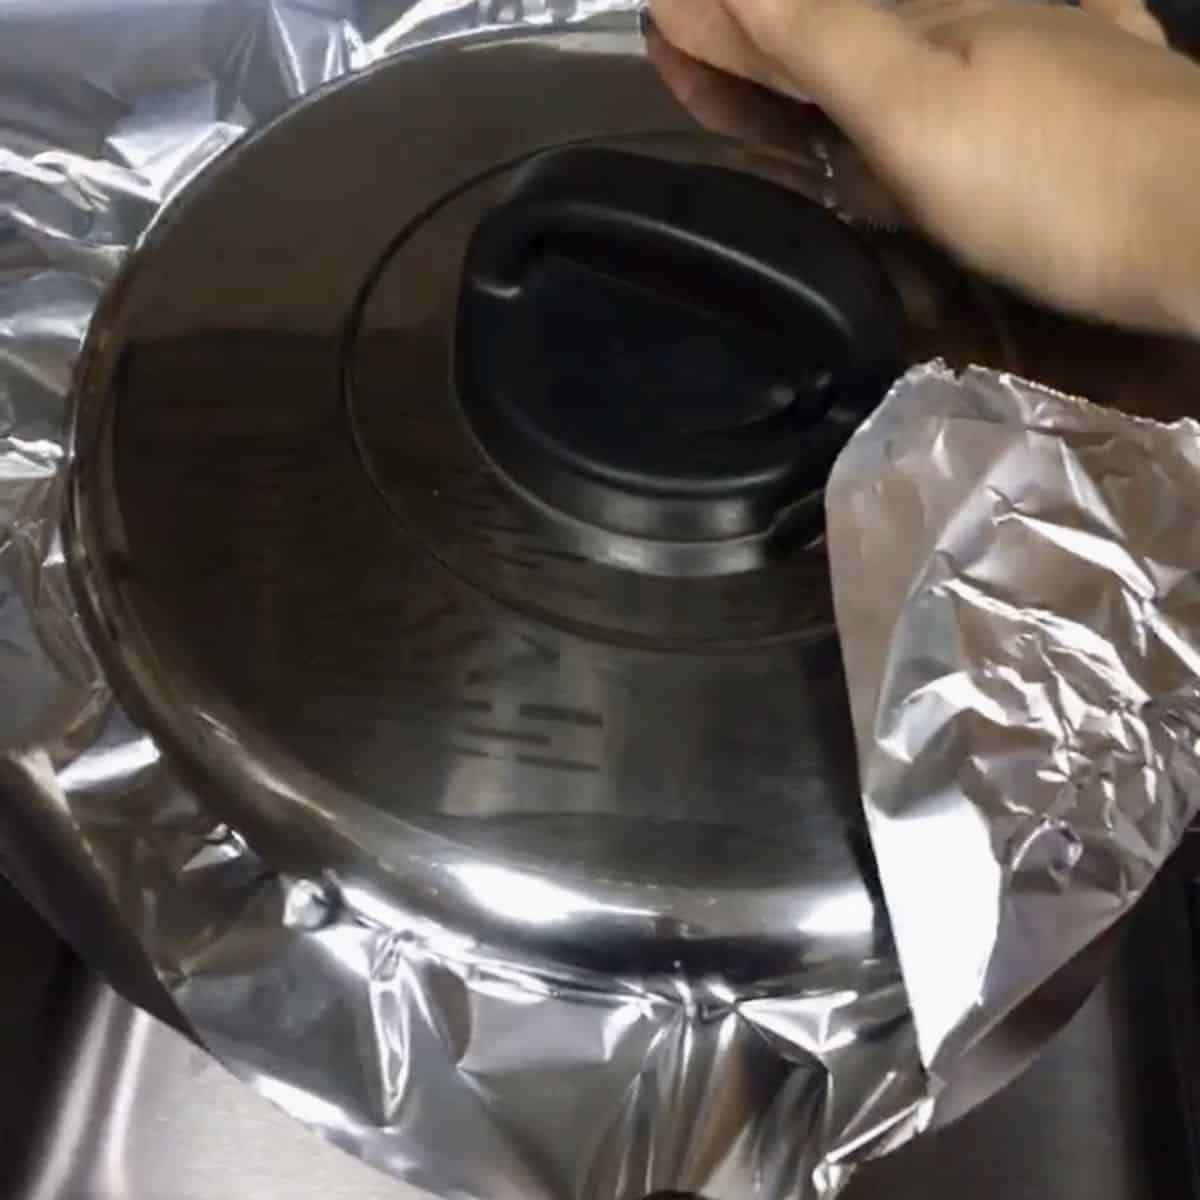 pot being covered with foil and then lid